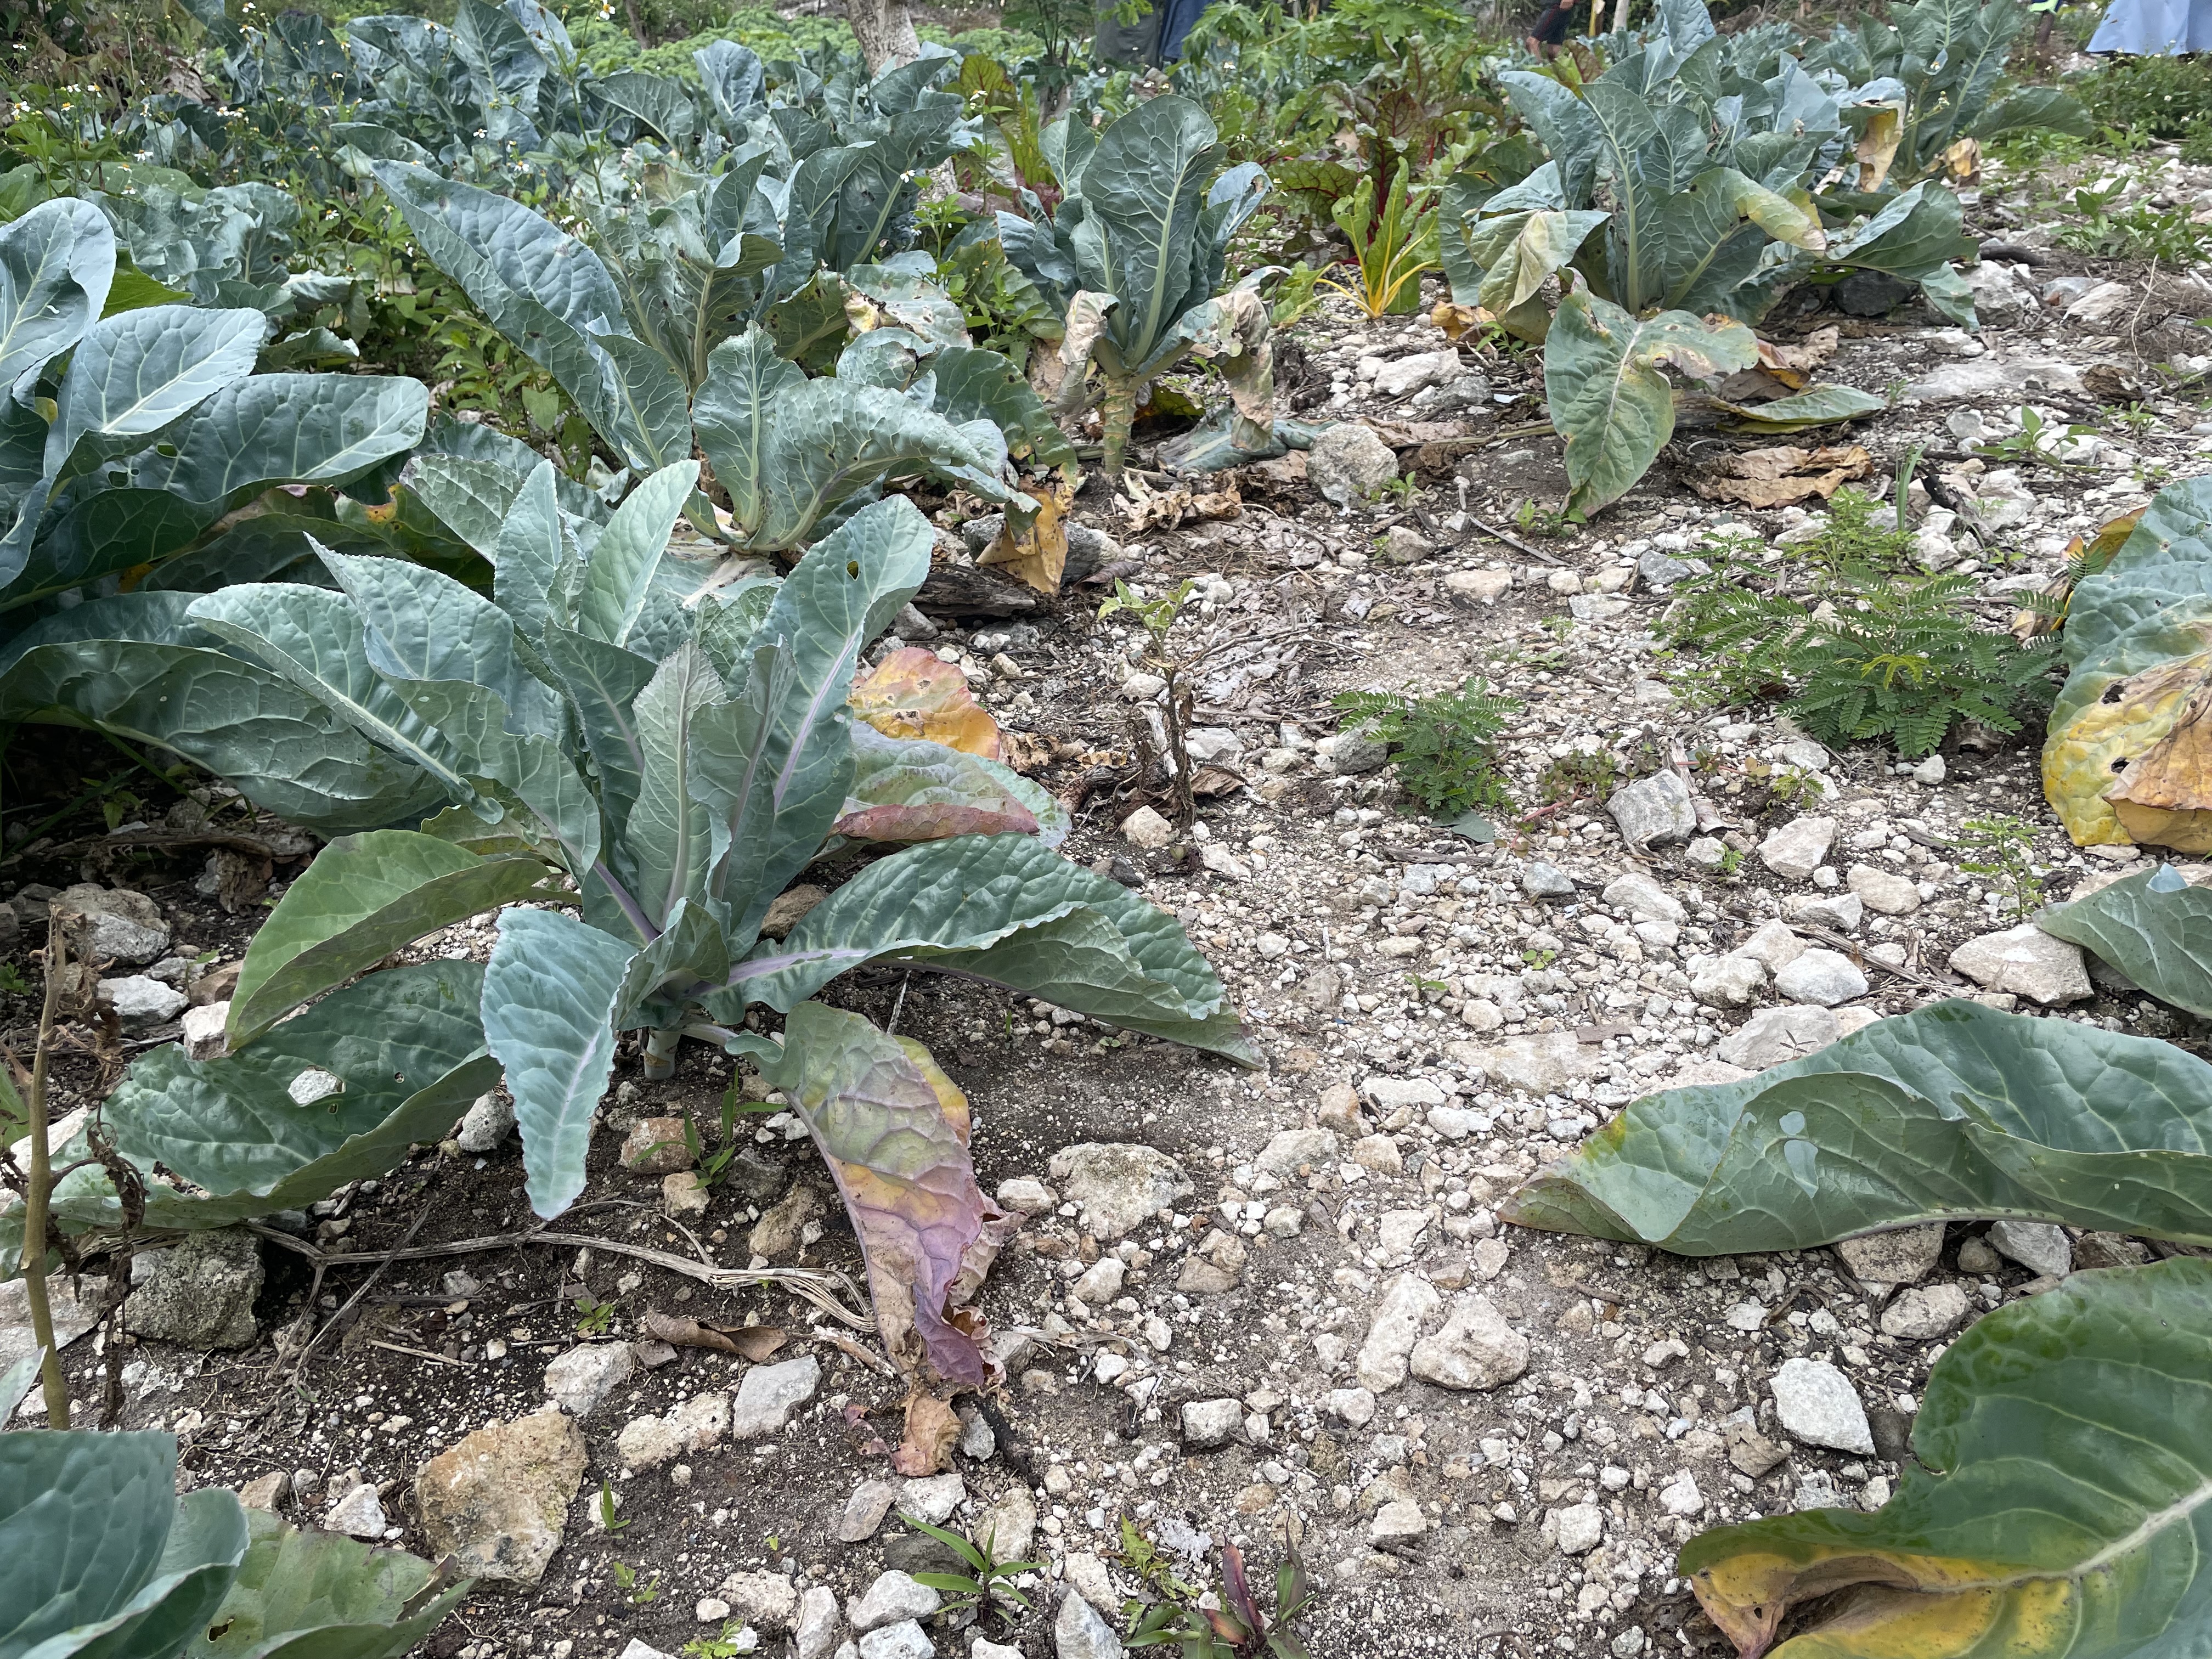 Open Poor soils complicate large-scale crop production in the Bahamas. Photo courtesy of Debi Kelly.